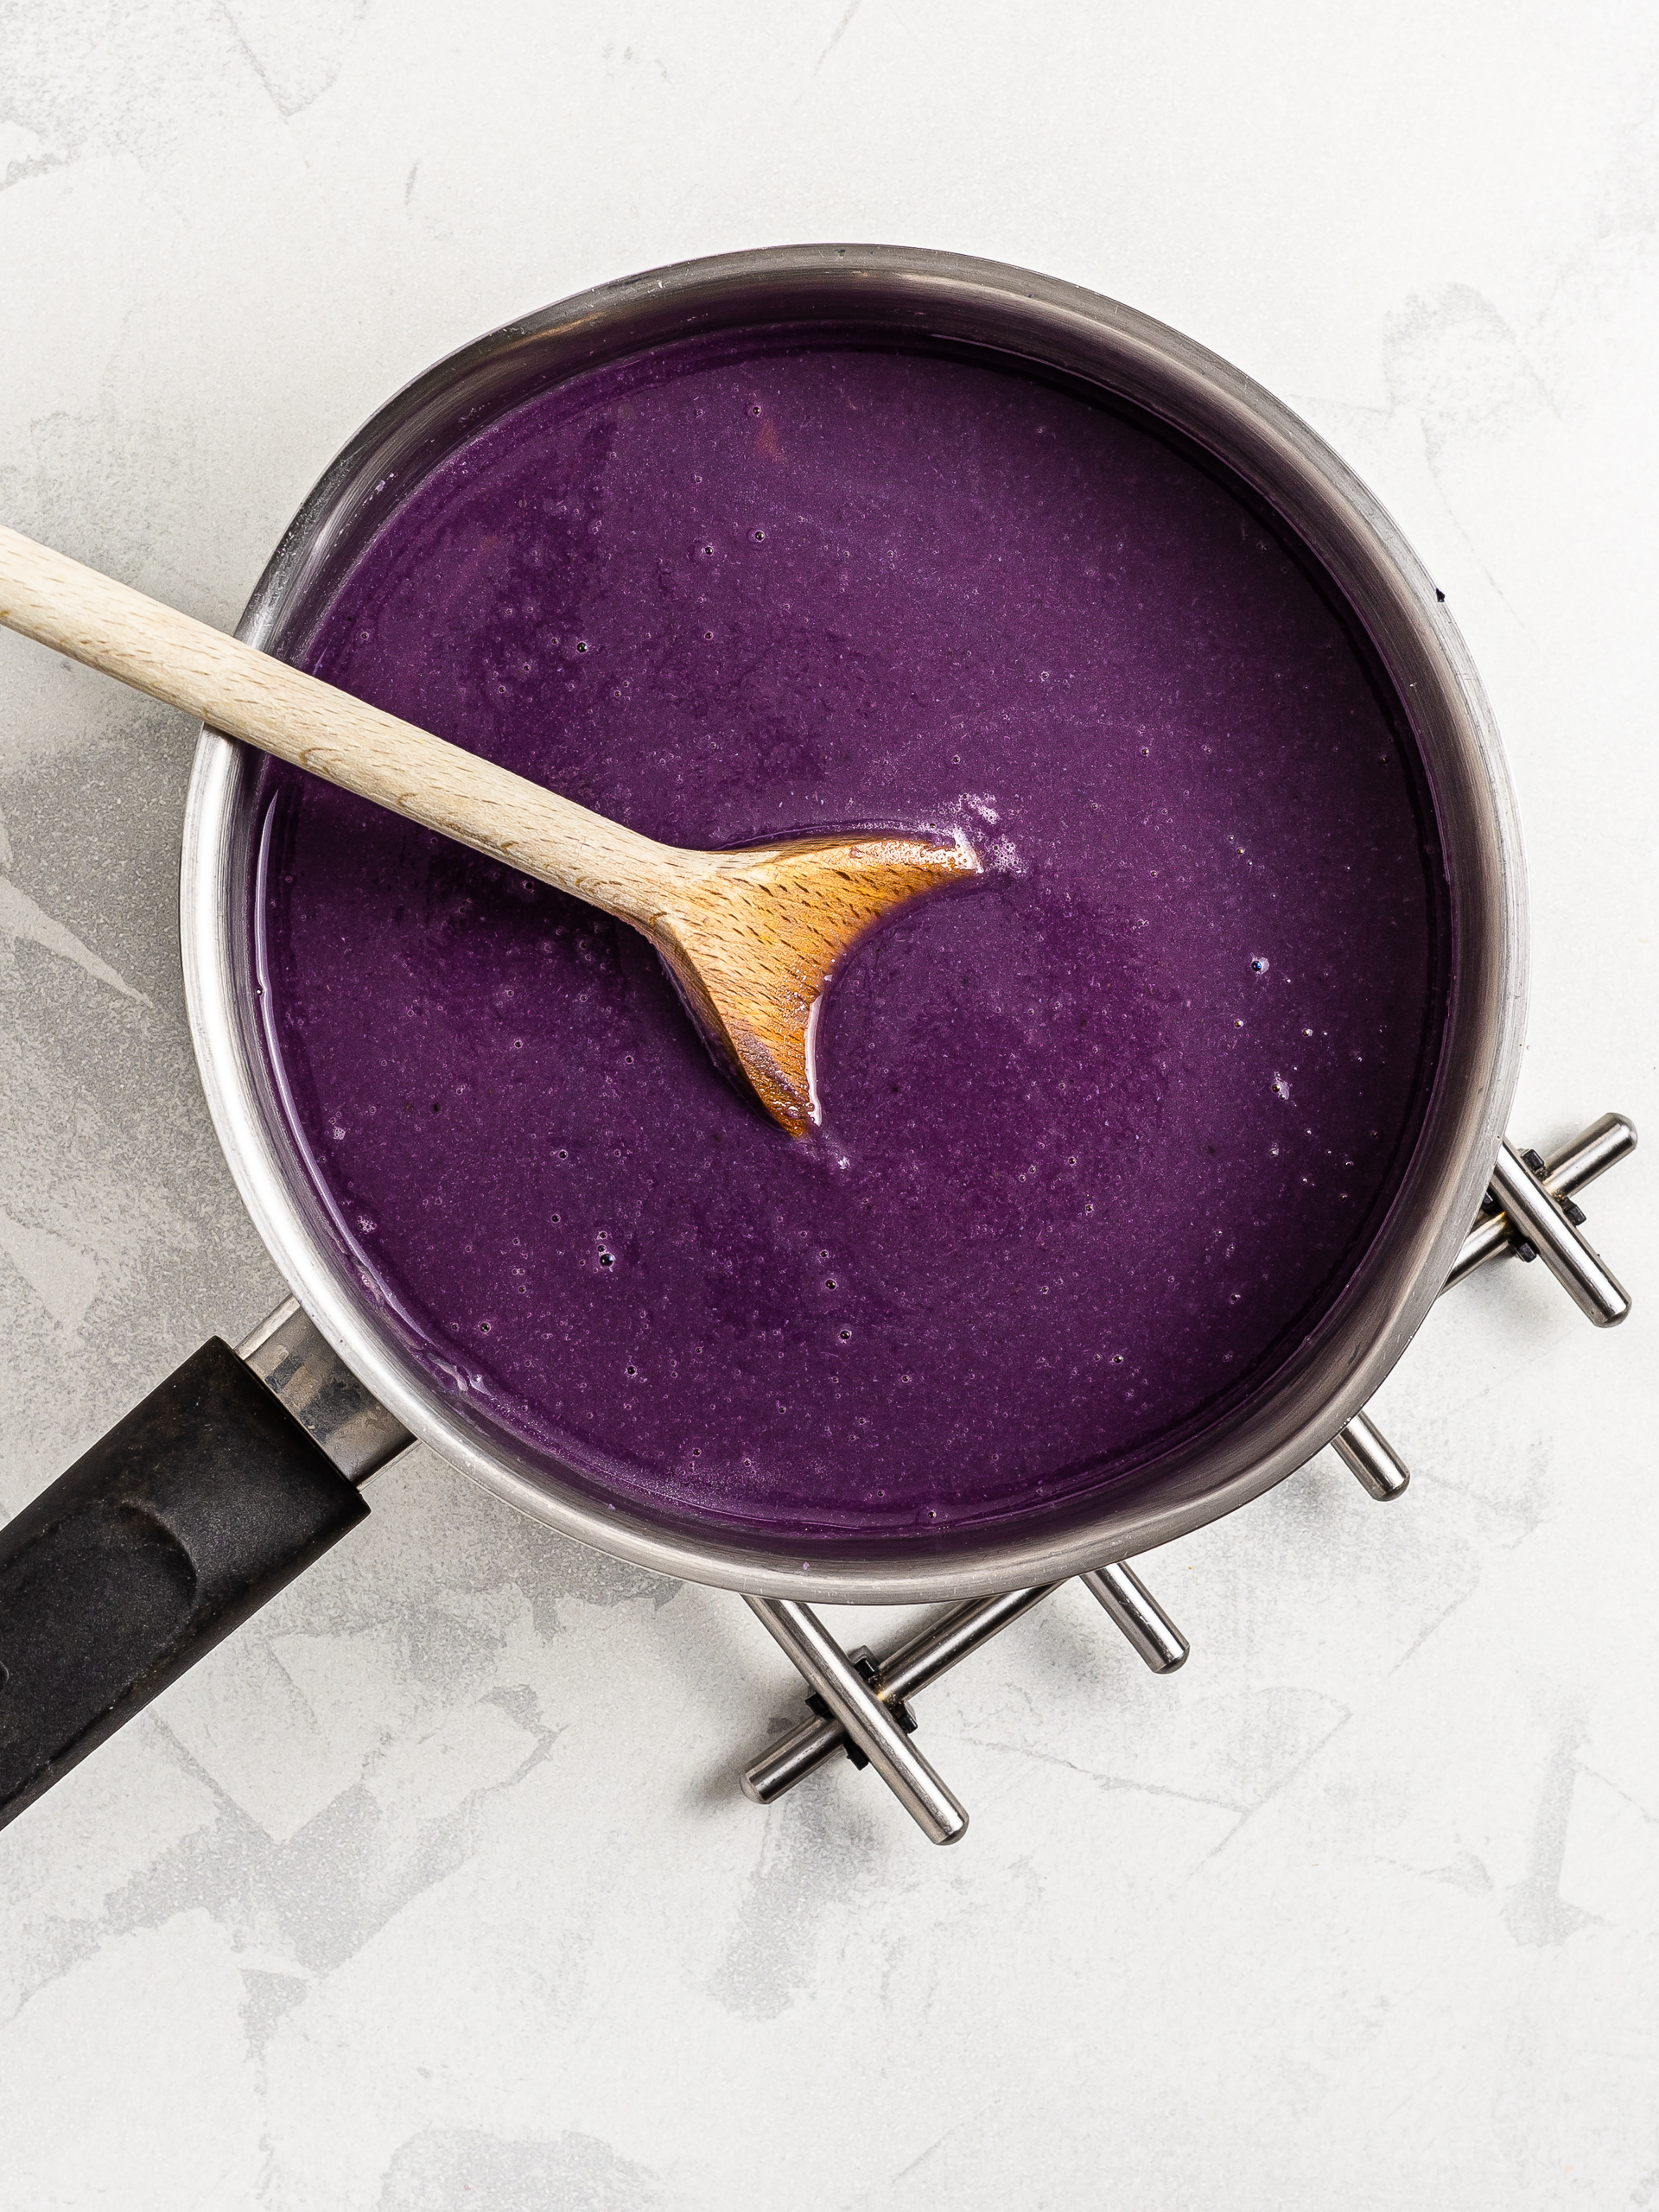 red cabbage soup blended into a velouté